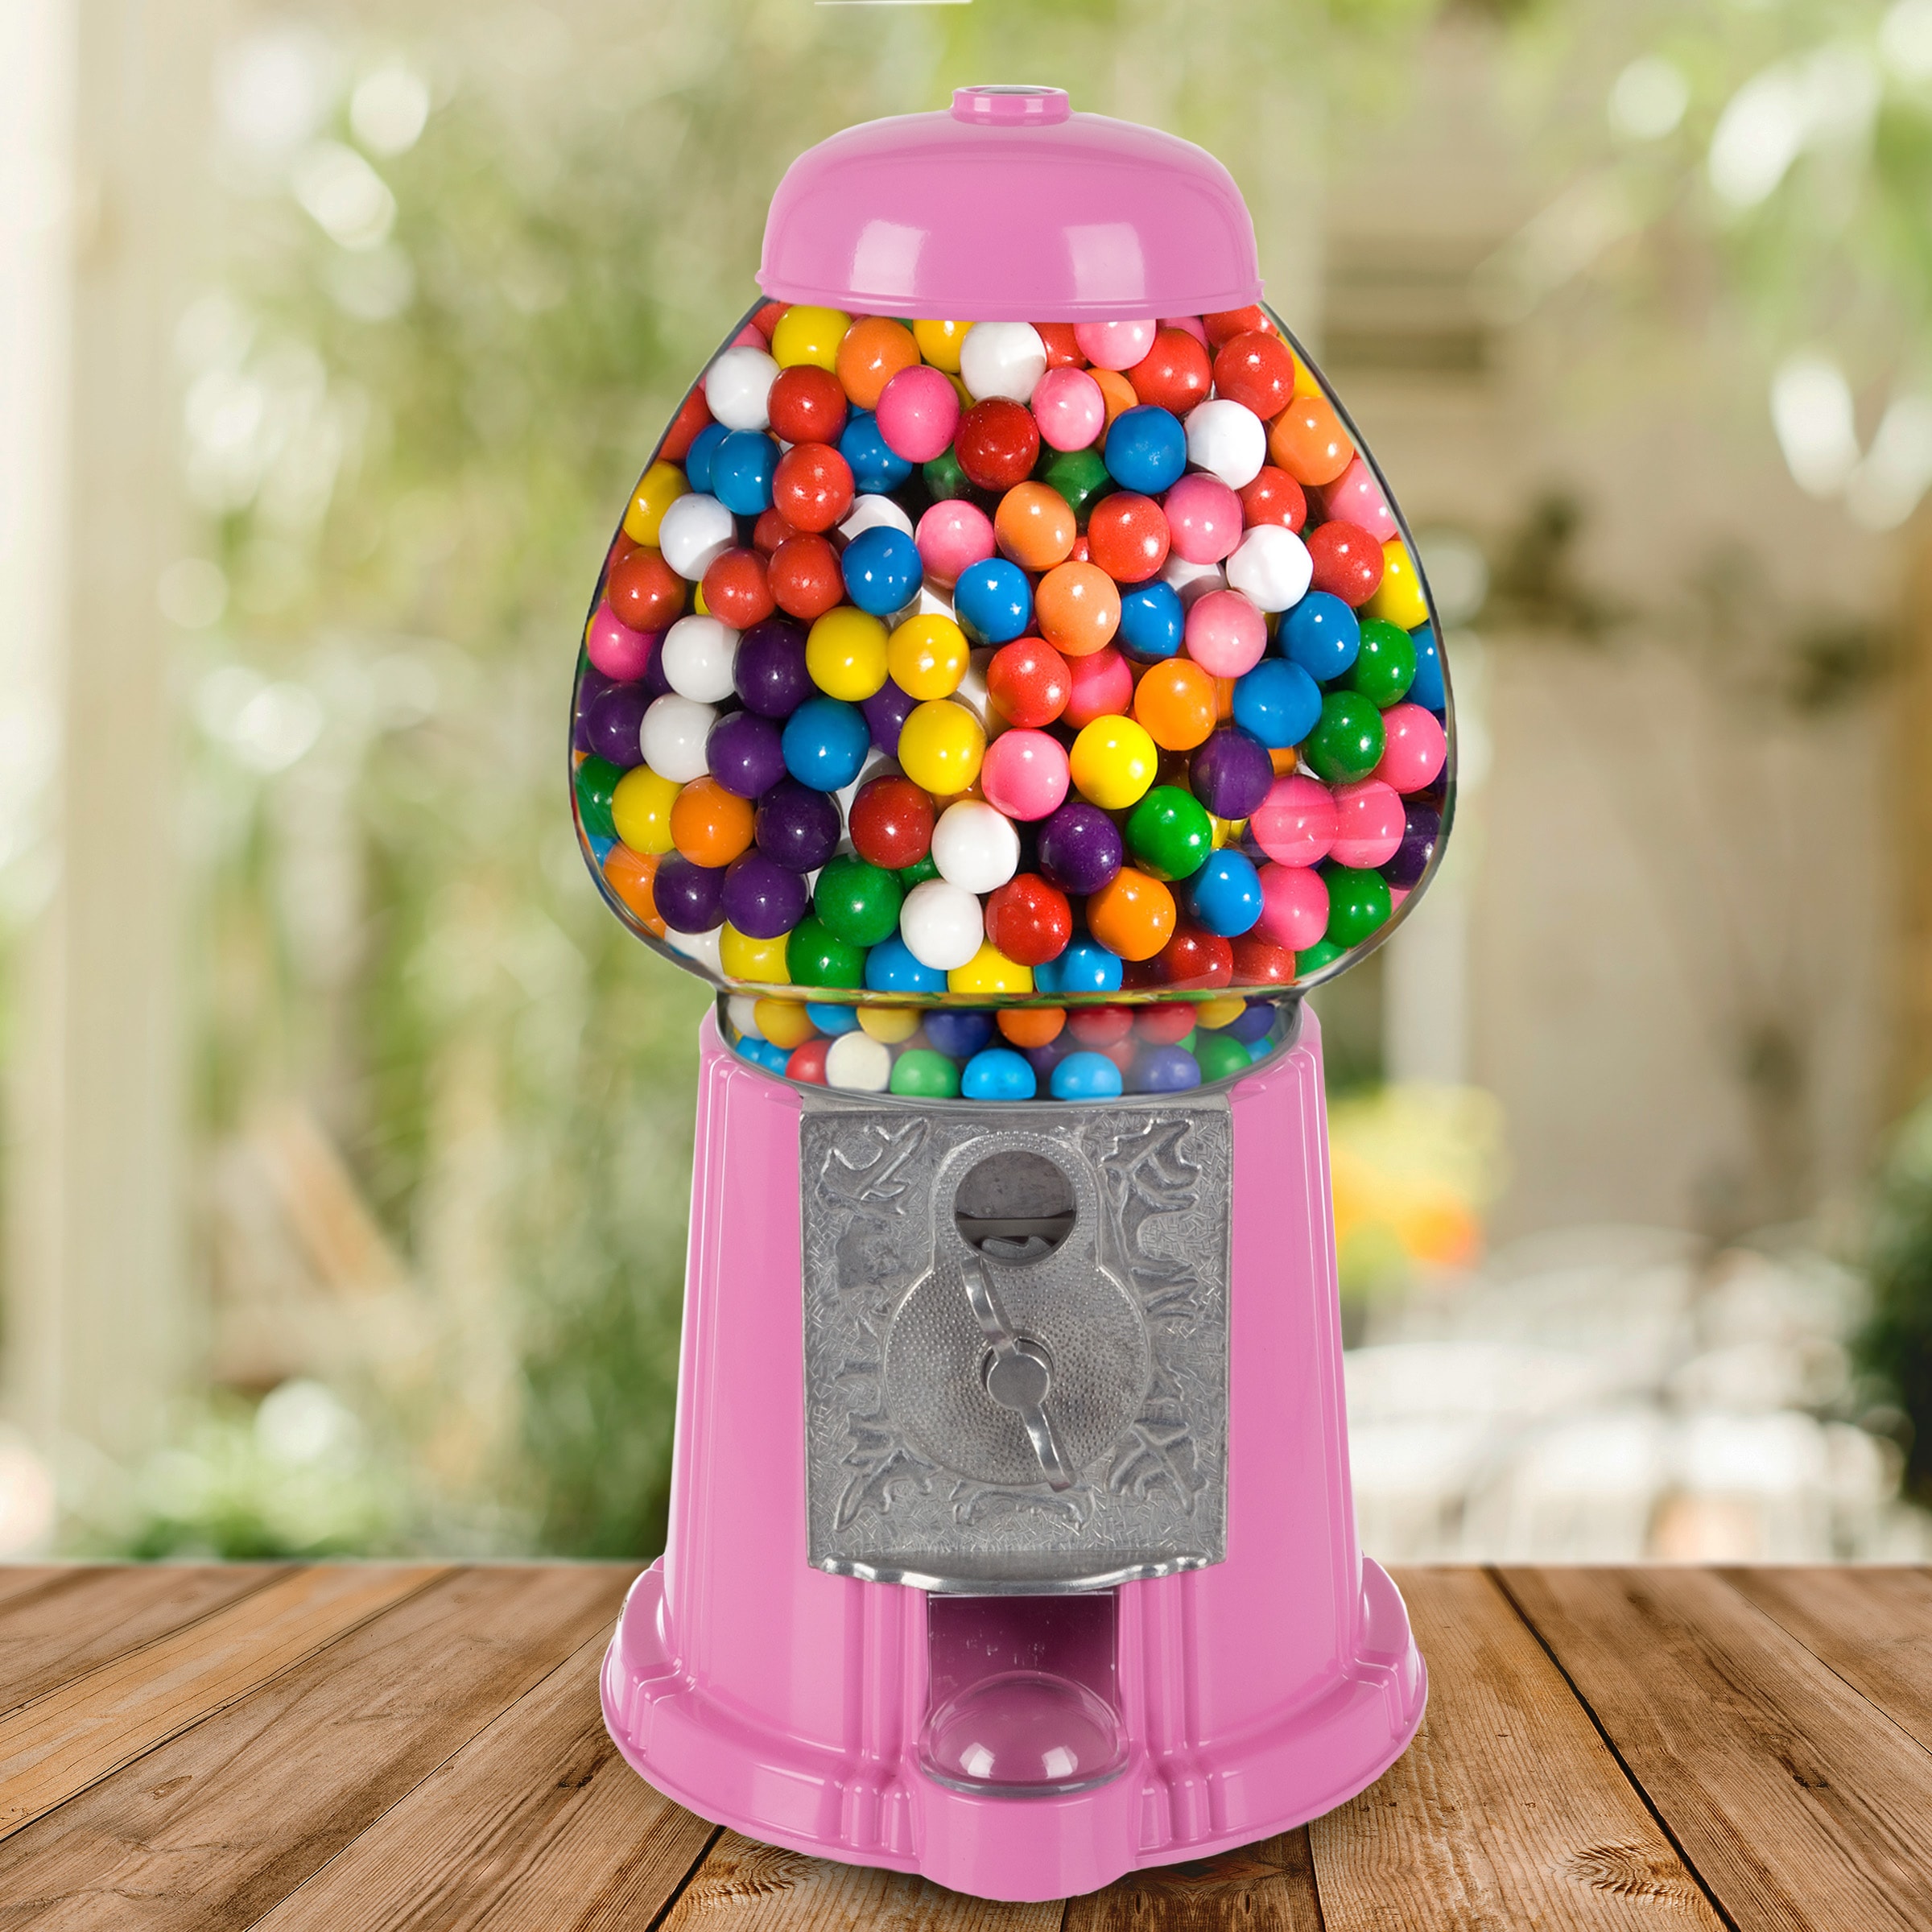 Handy Gourmet The Original Triple Candy Machine - Fun Candy & Nut Dispenser  - New & Improved (Blue) - 360 Degree Selection